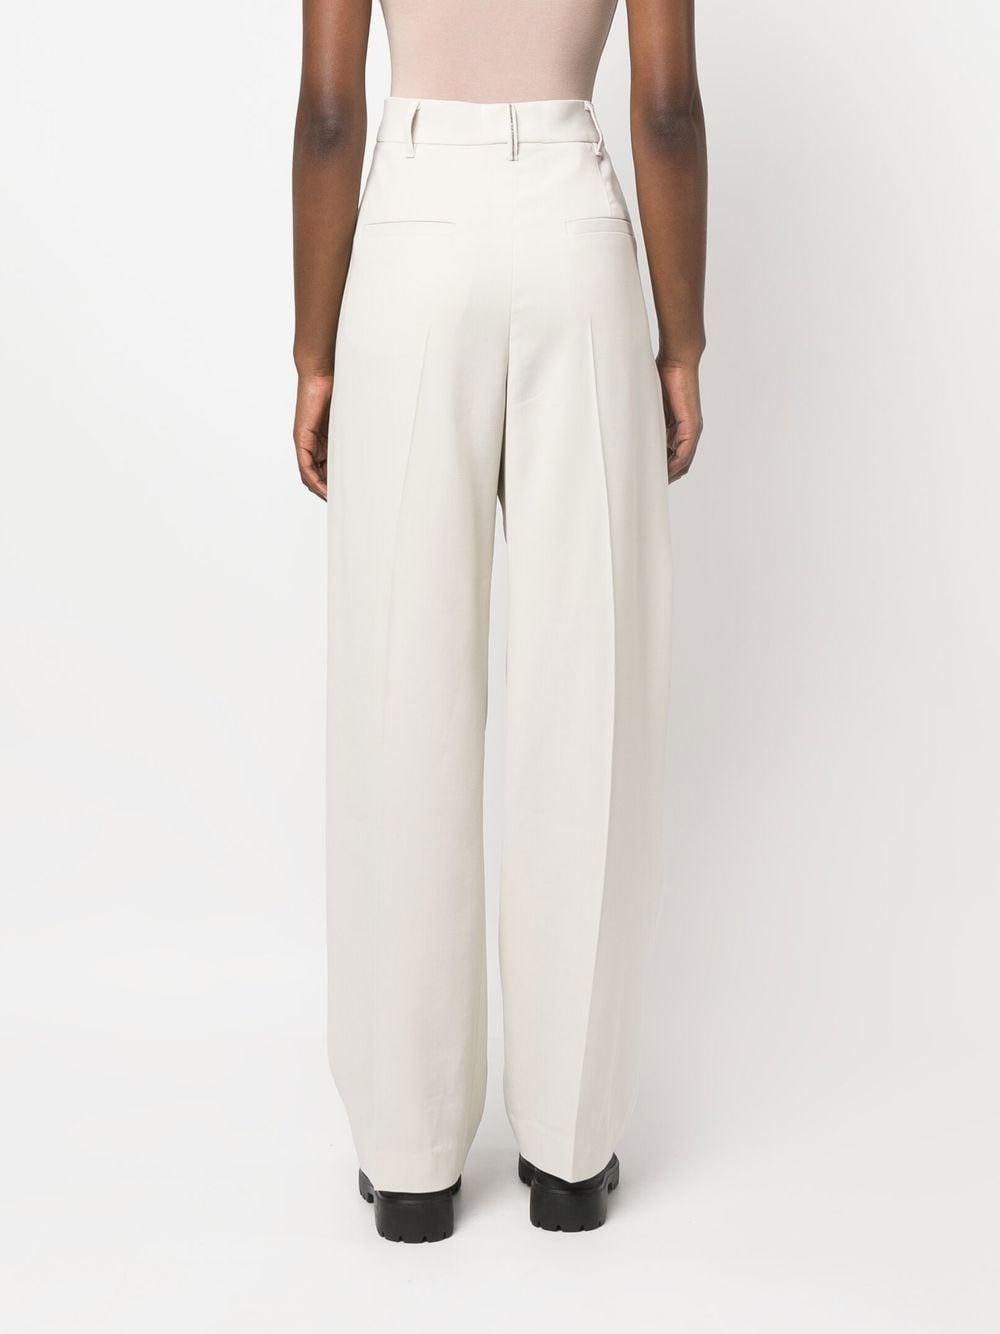 Womens Clothing Trousers Natural Brunello Cucinelli Exclusive To Mytheresa – Satin Wide-leg Pants in Beige Slacks and Chinos Wide-leg and palazzo trousers 